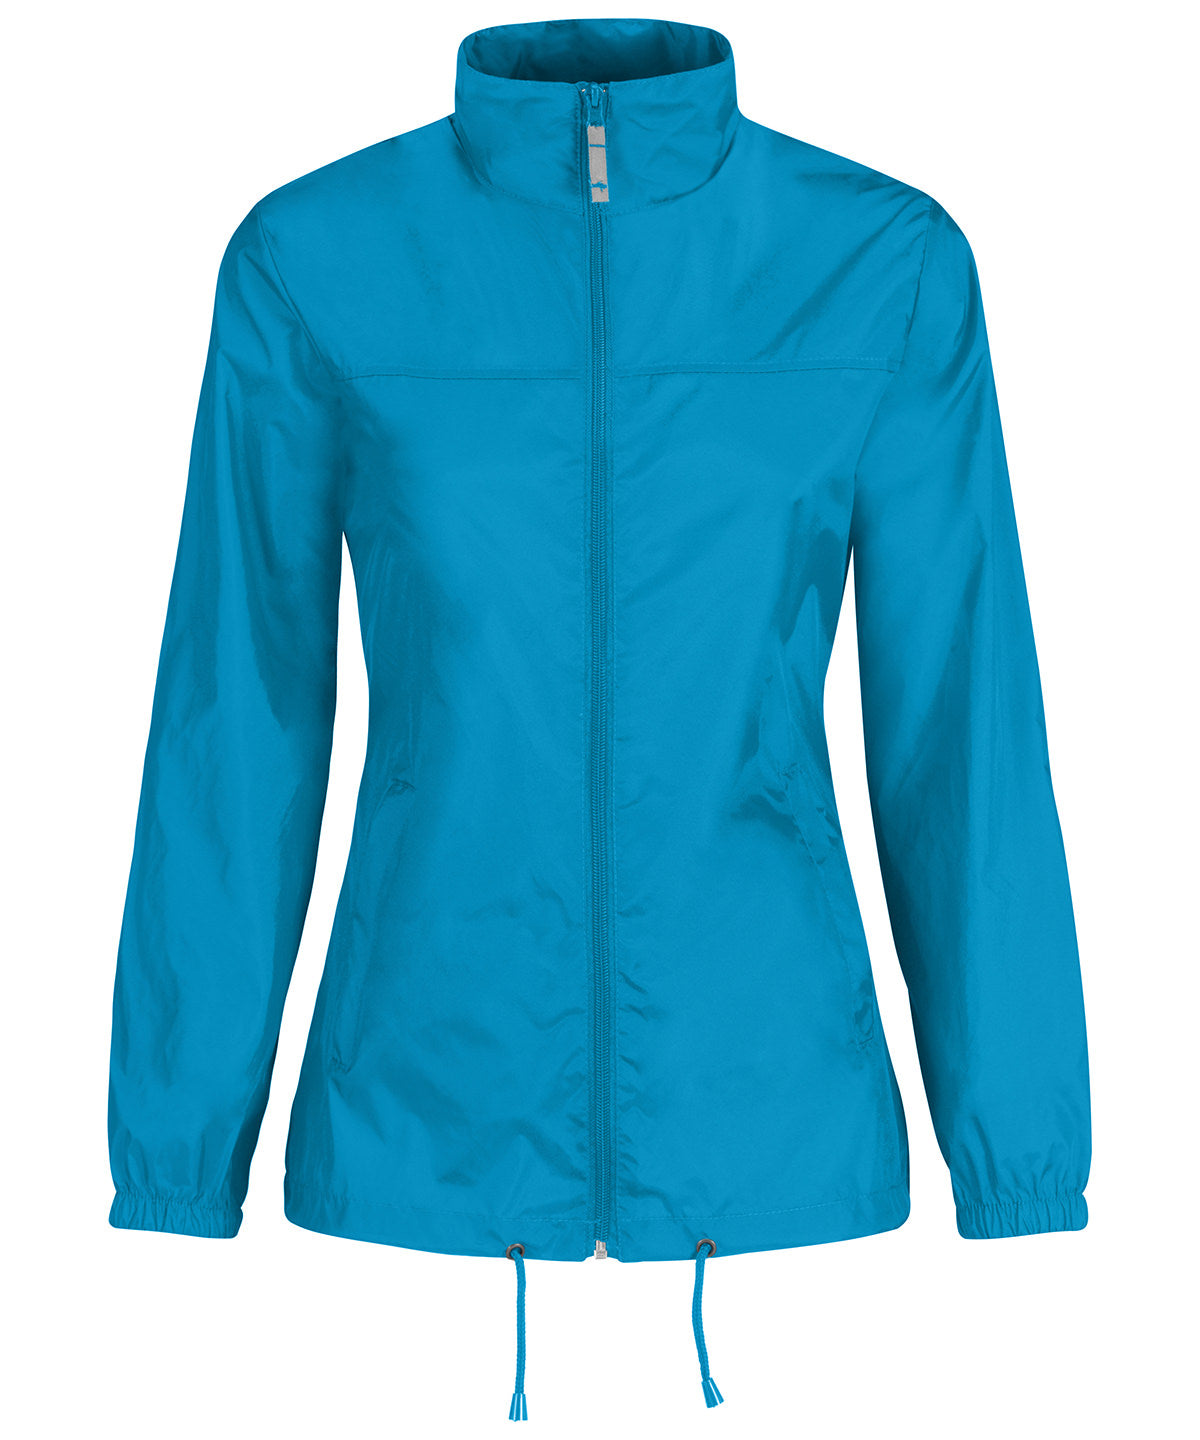 Personalised Jackets - Turquoise B&C Collection B&C Sirocco /kids